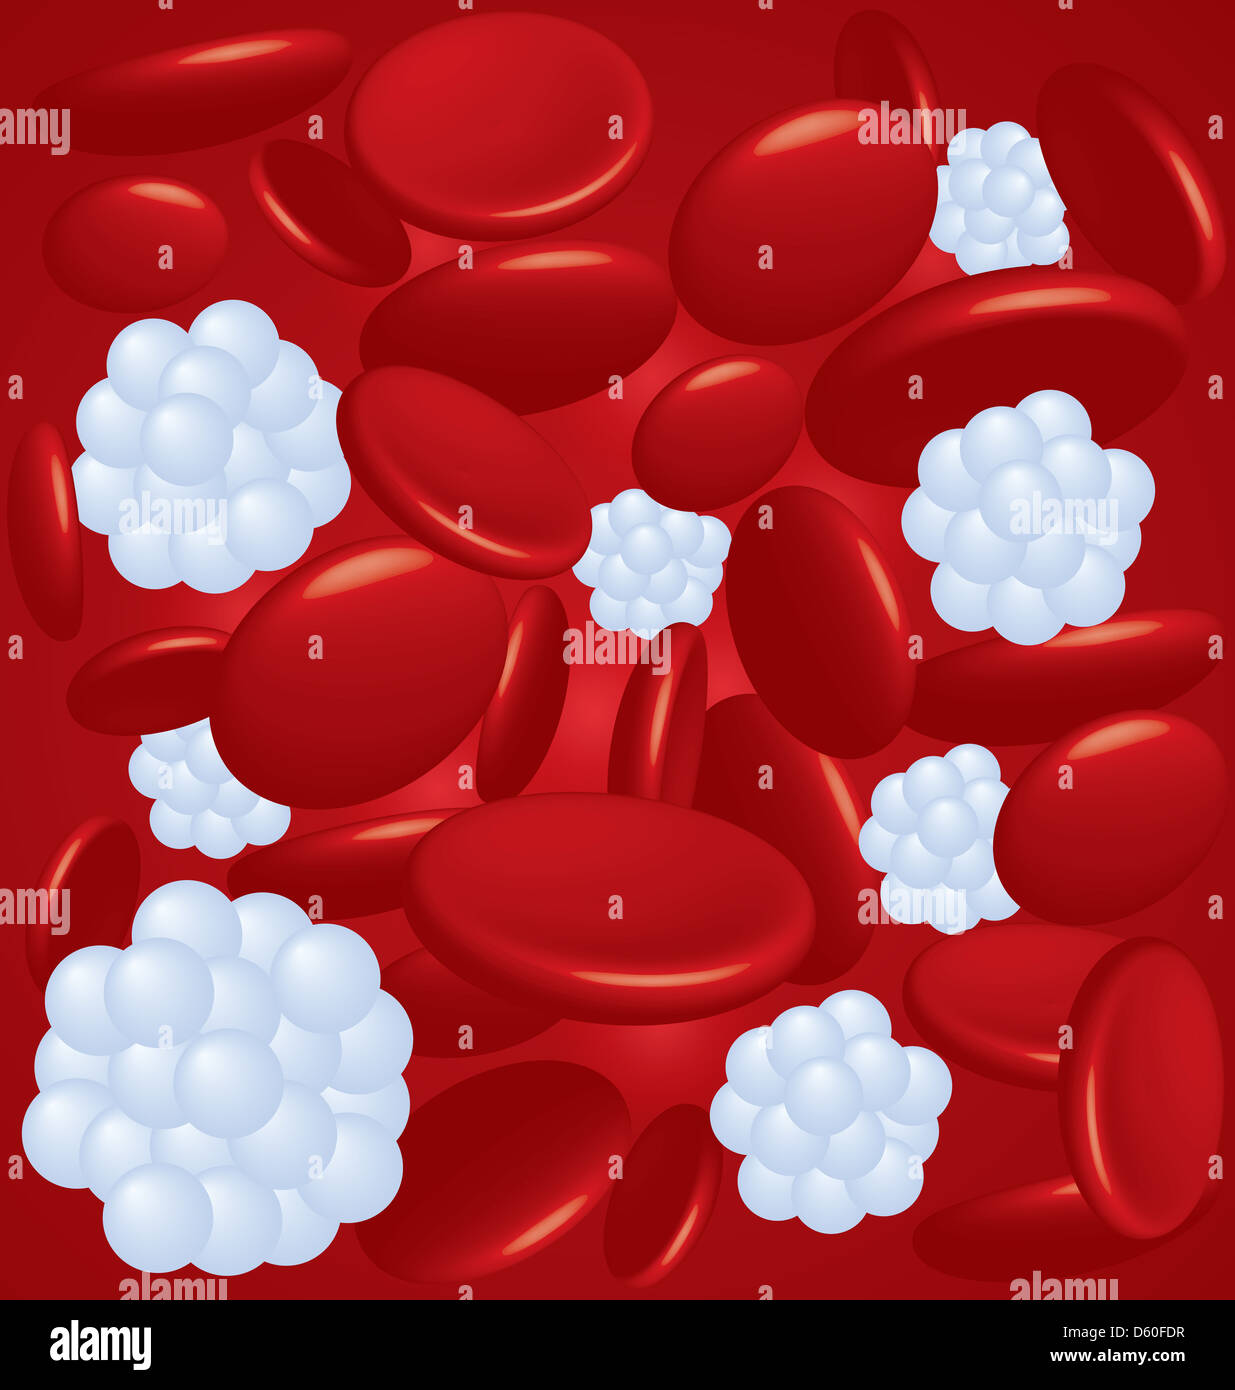 Blood cell types Stock Photo